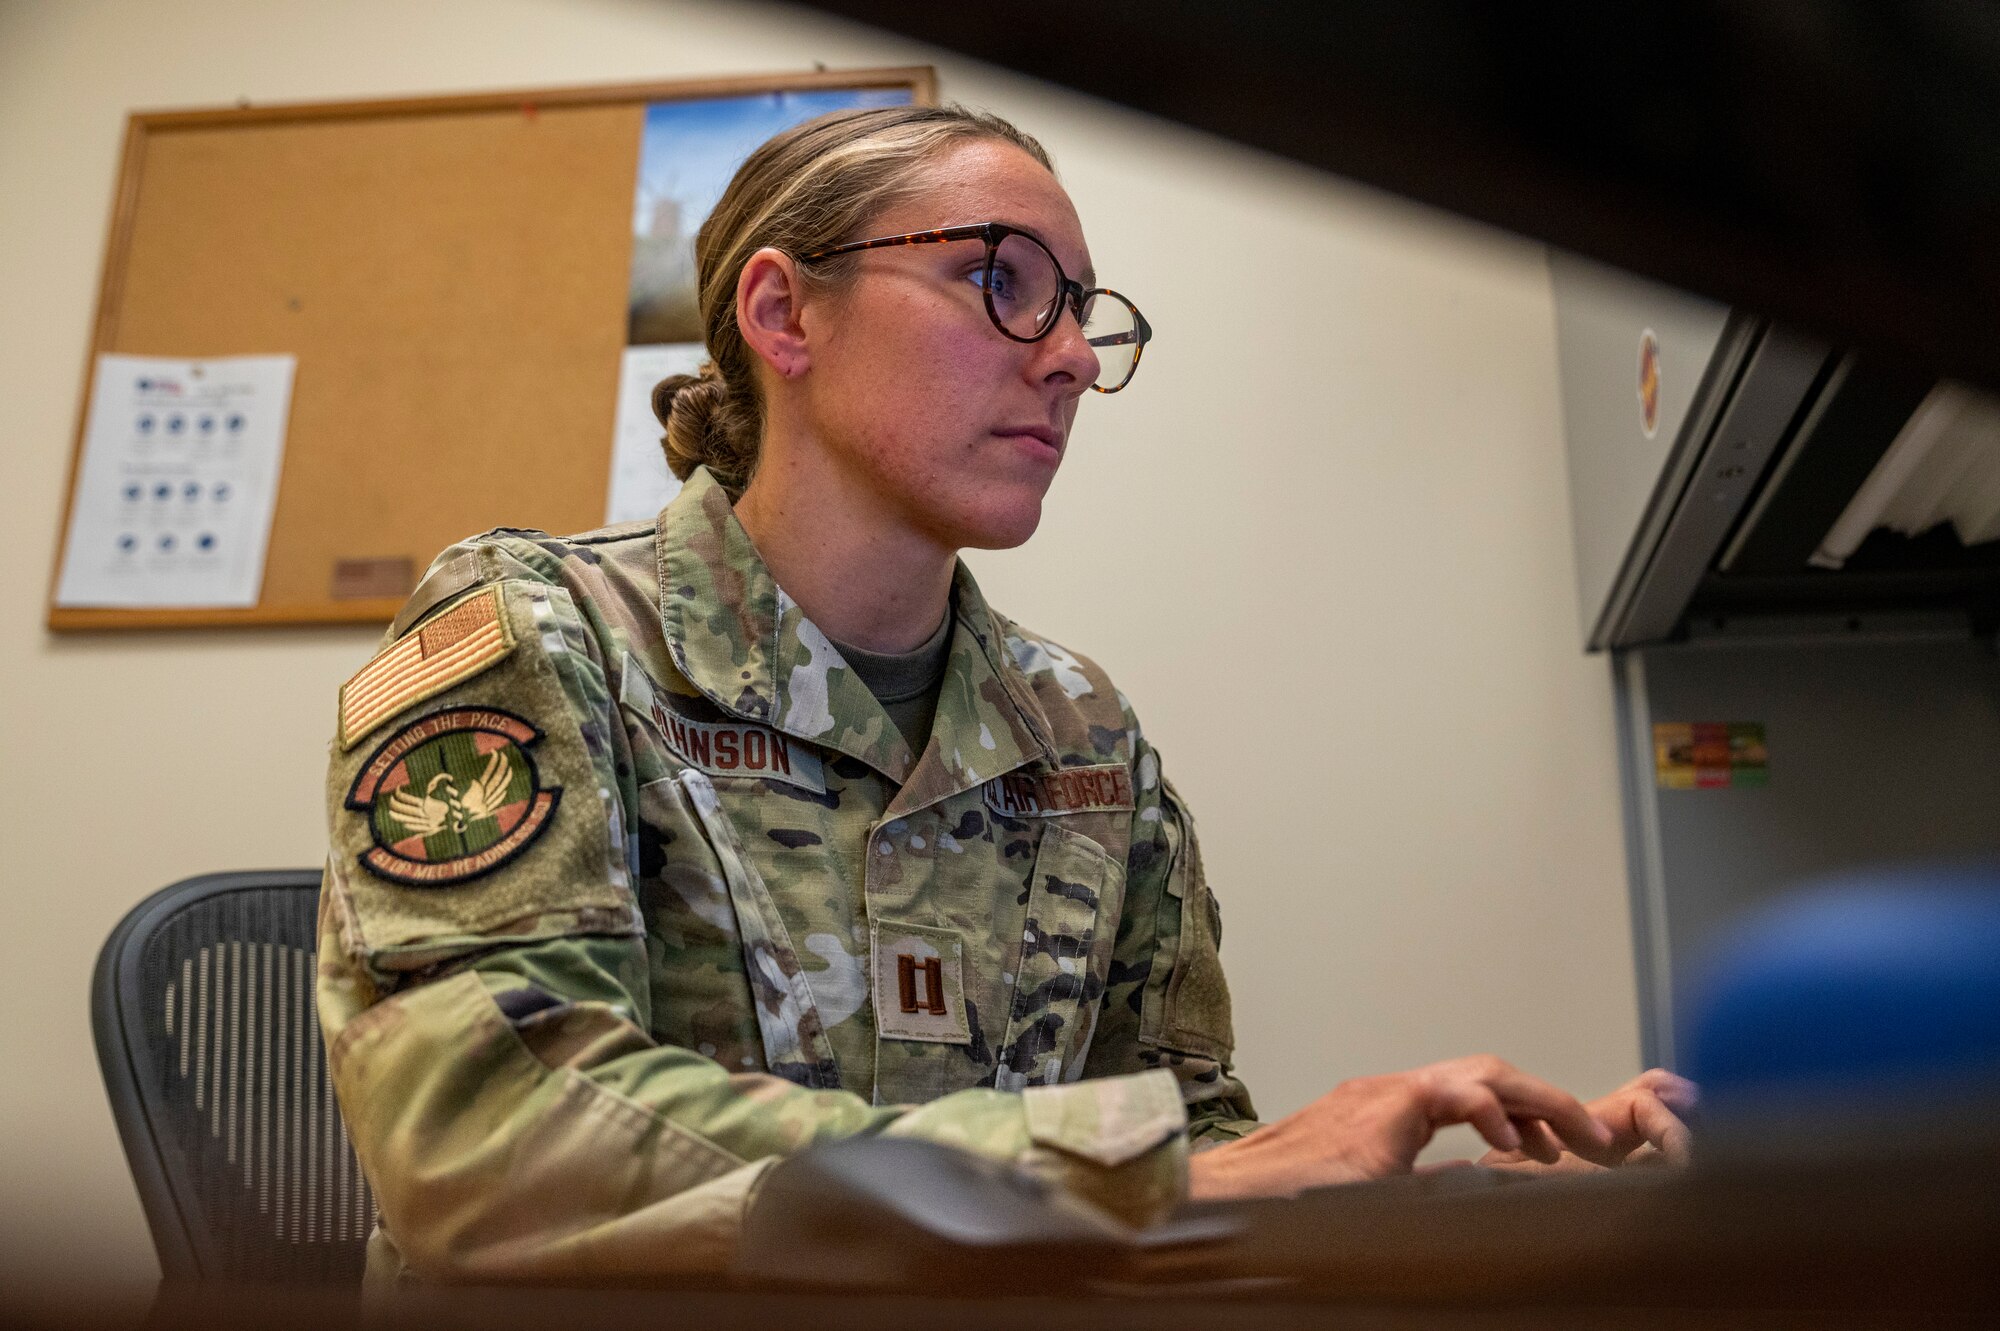 U.S. Air Force Capt. H. Marleen Johnson, 51st Medical Group public health element chief, sends emails in her office at Osan Air Base, Republic of Korea, June 26, 2023.